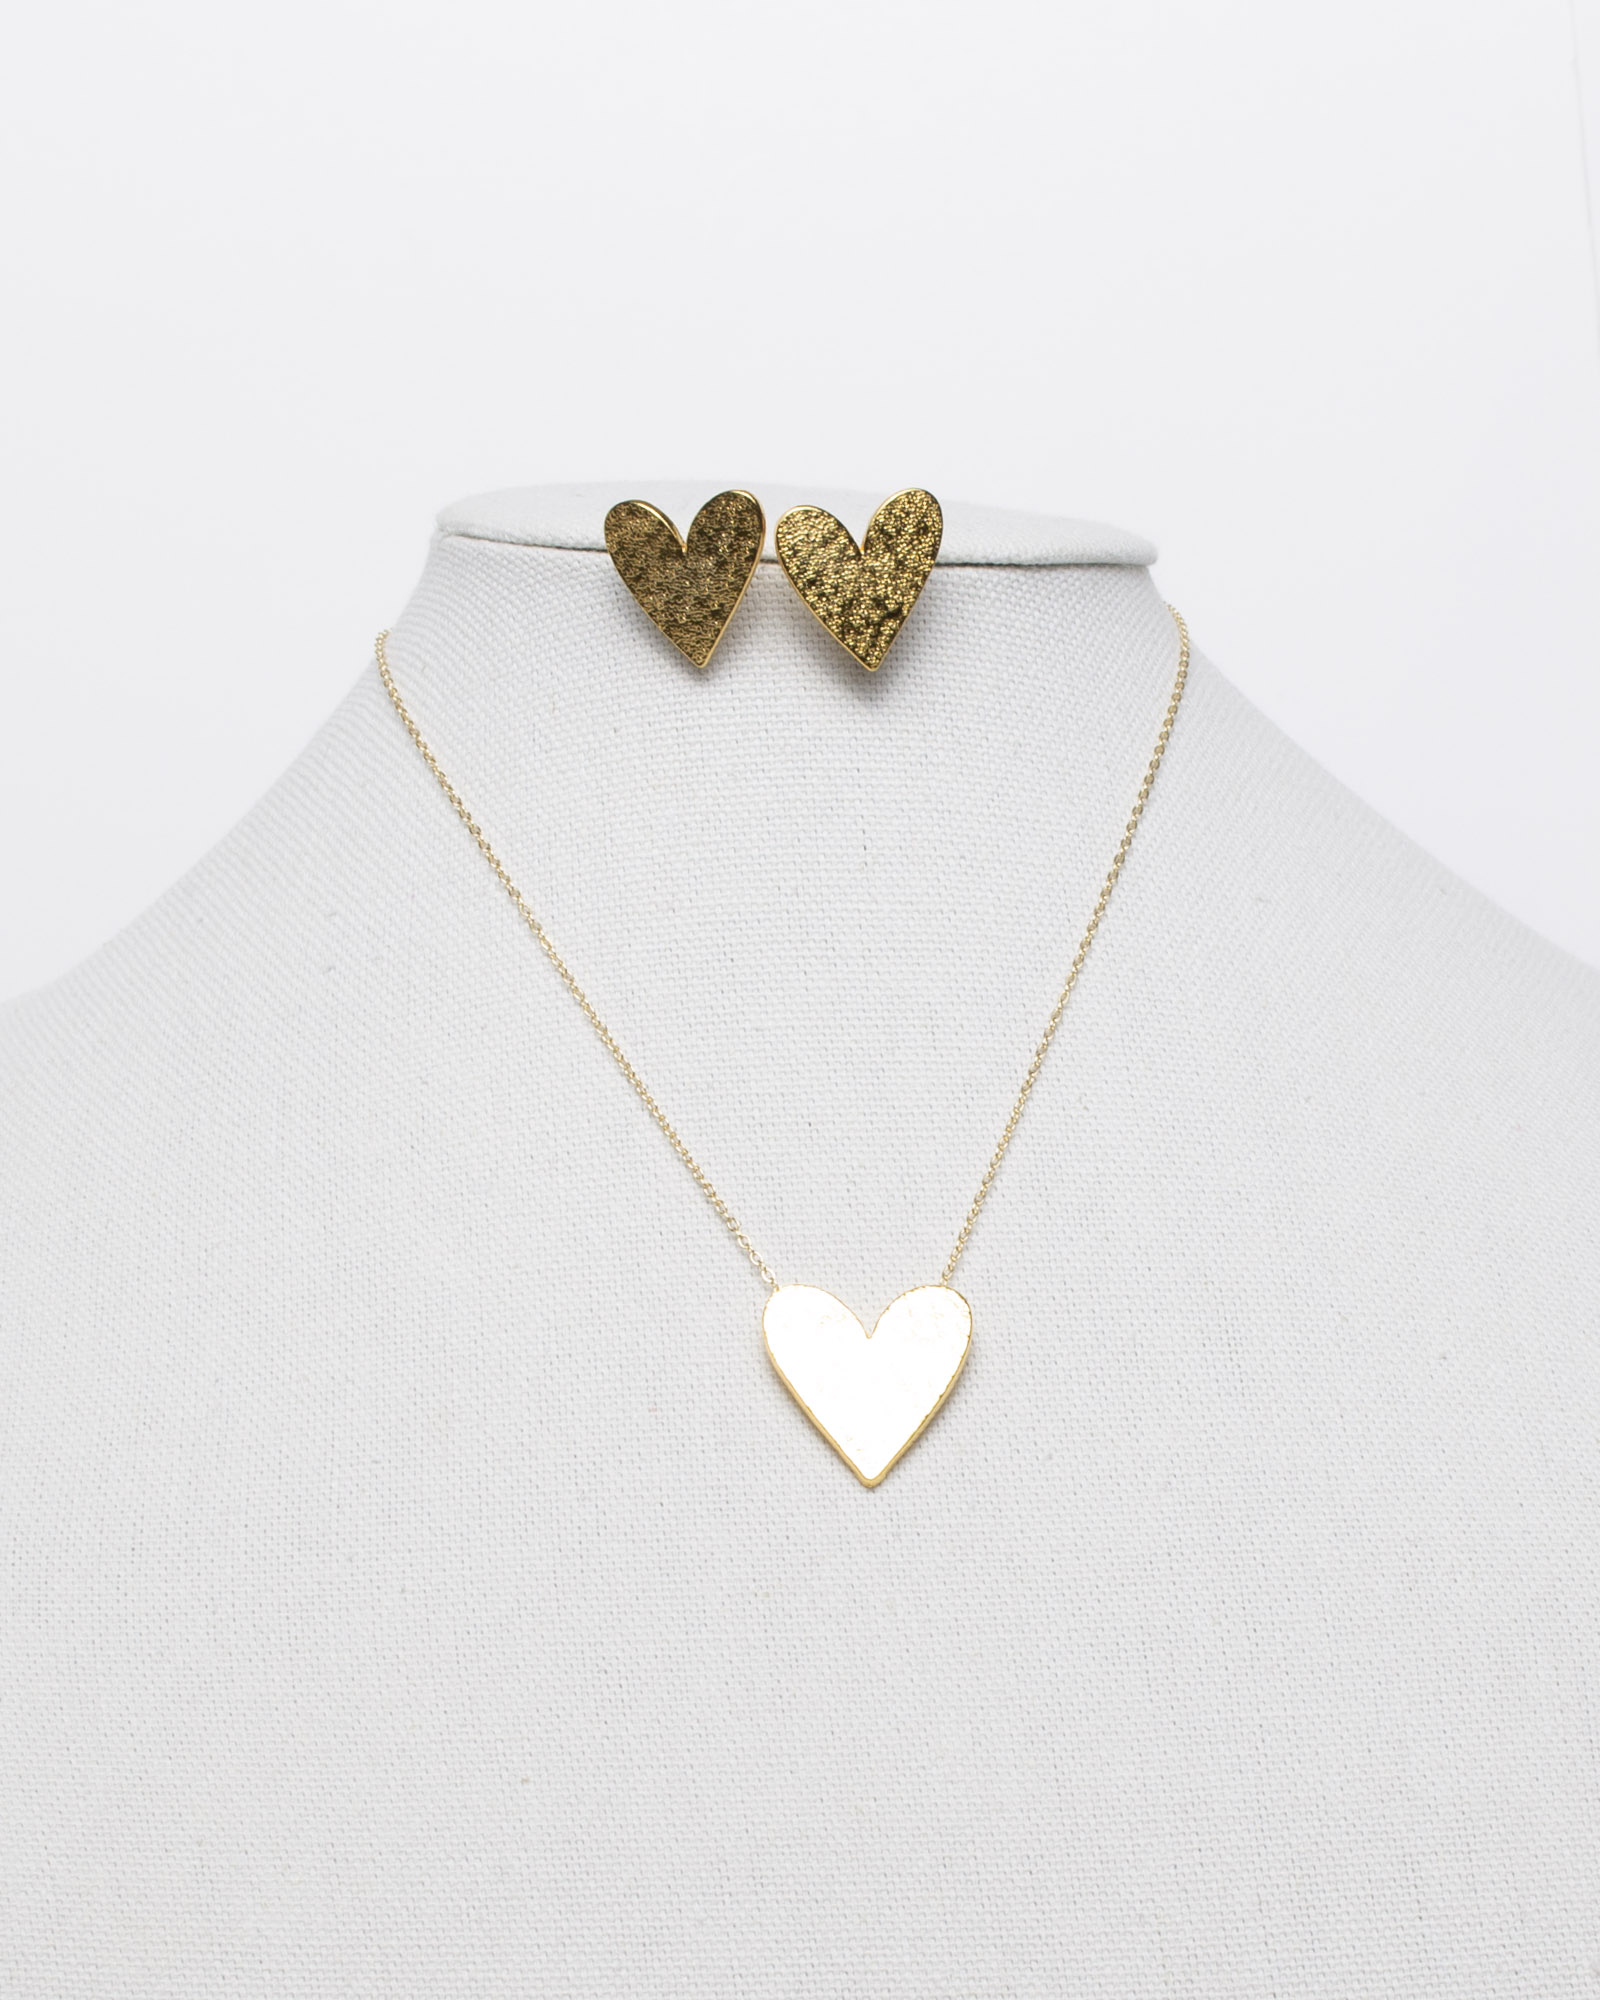 Golden Heart Necklace and Earring Set